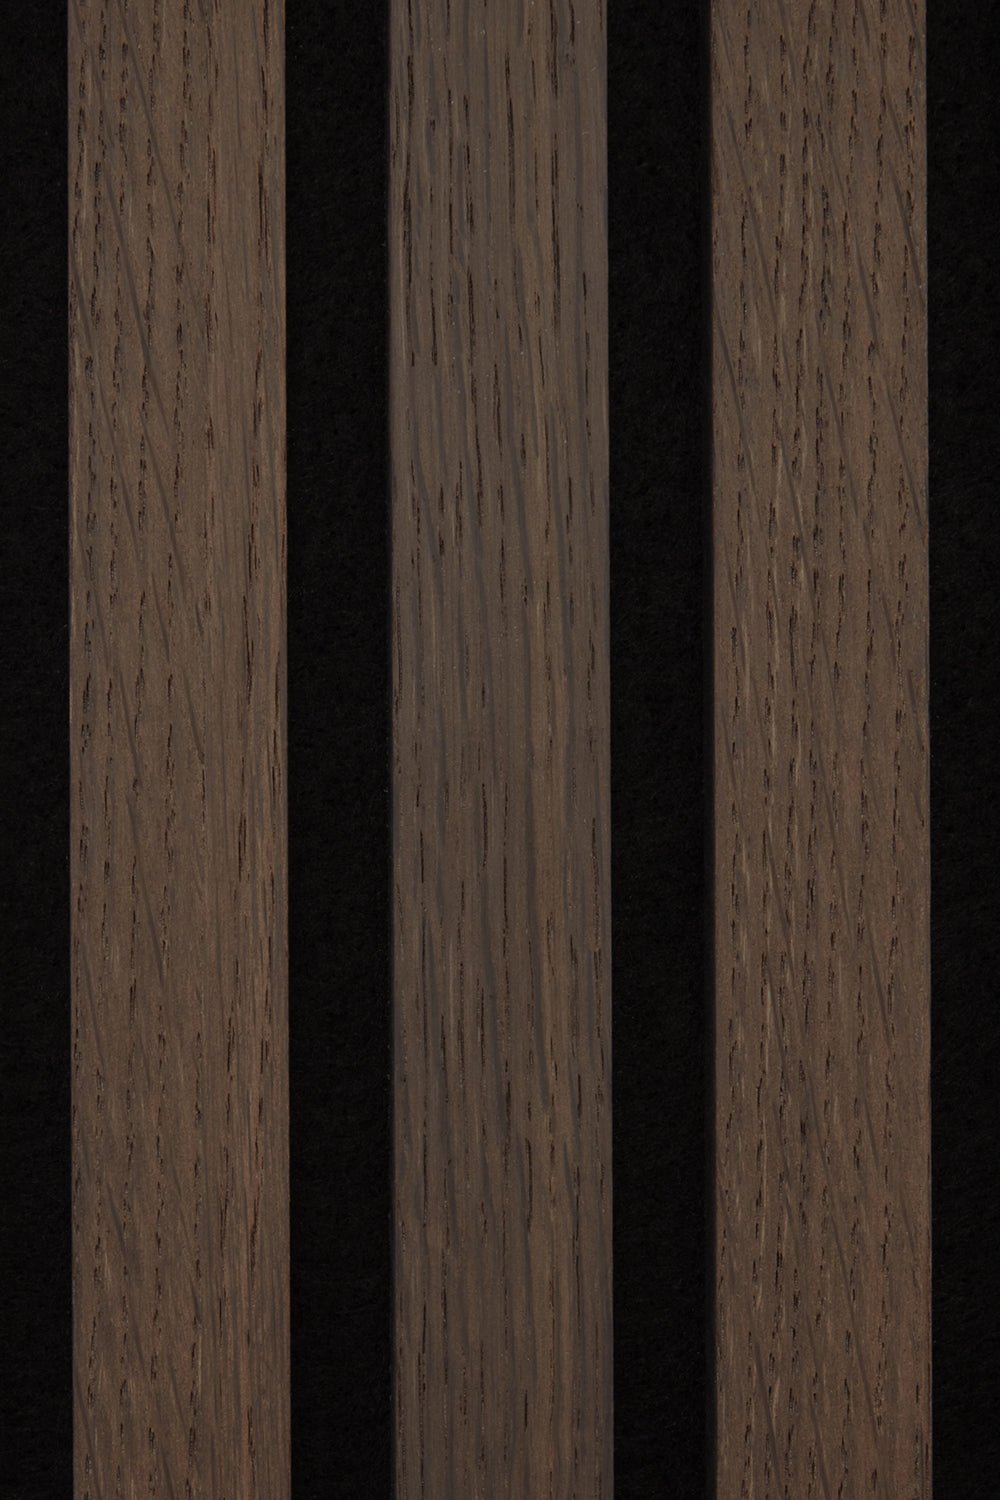 Texture of the Smoked Oak Acoustic SlatWall Panel from Naturewall.

